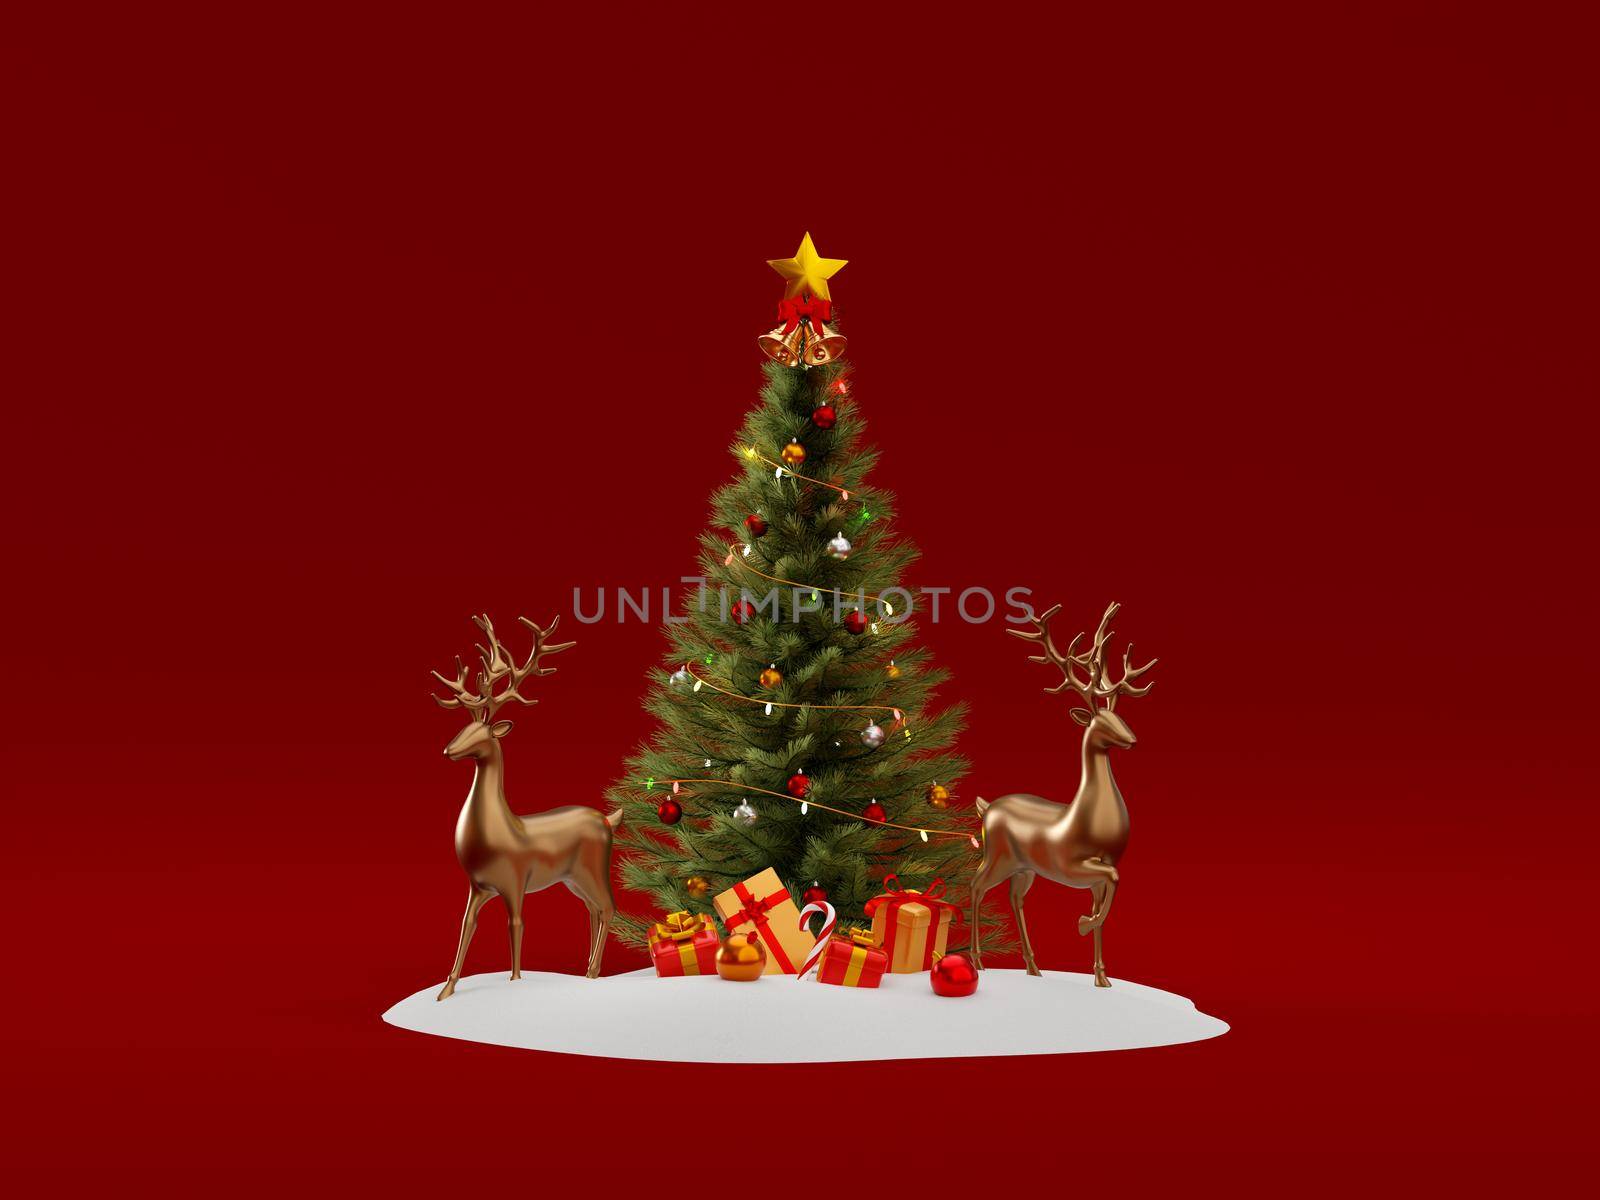 3d illustration of reindeer with Christmas tree on snow ground by nutzchotwarut